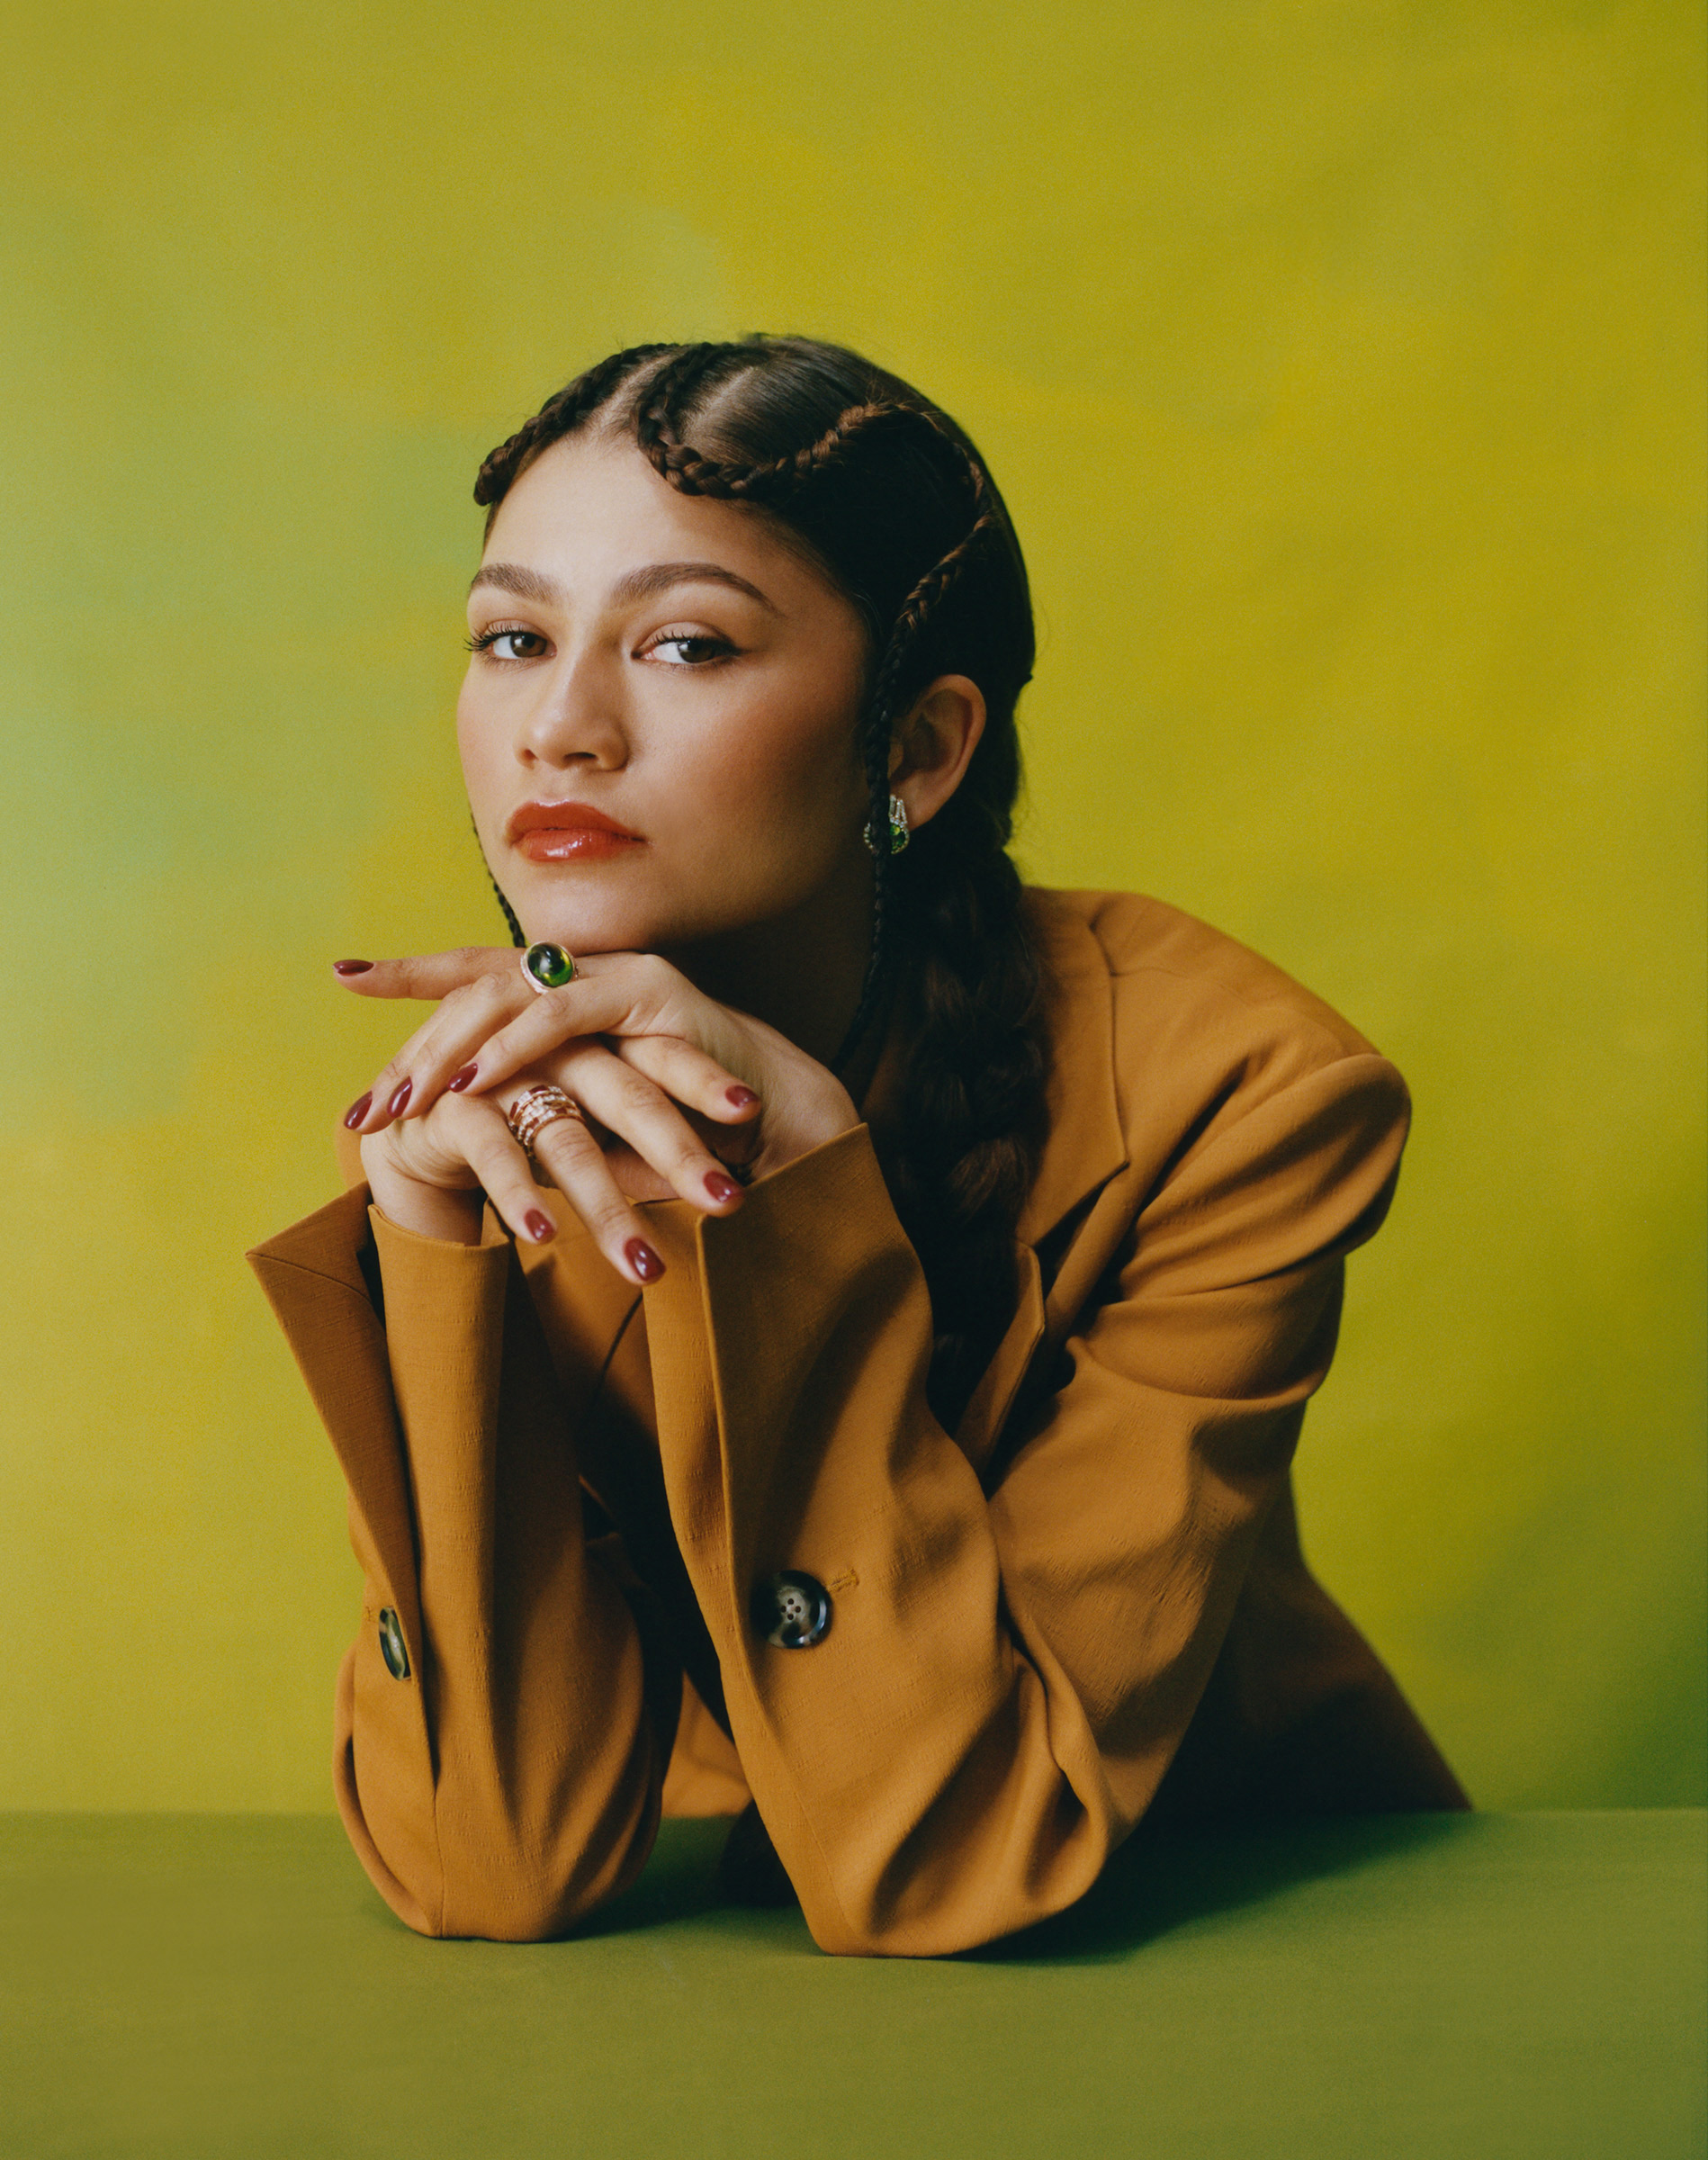 <strong>Zendaya.</strong> "<a href="https://time.com/collection/100-most-influential-people-2022/6177806/zendaya/">Time 100 Most Influential People: Zendaya,</a>" June 6 issue. (Camila Falquez for TIME)